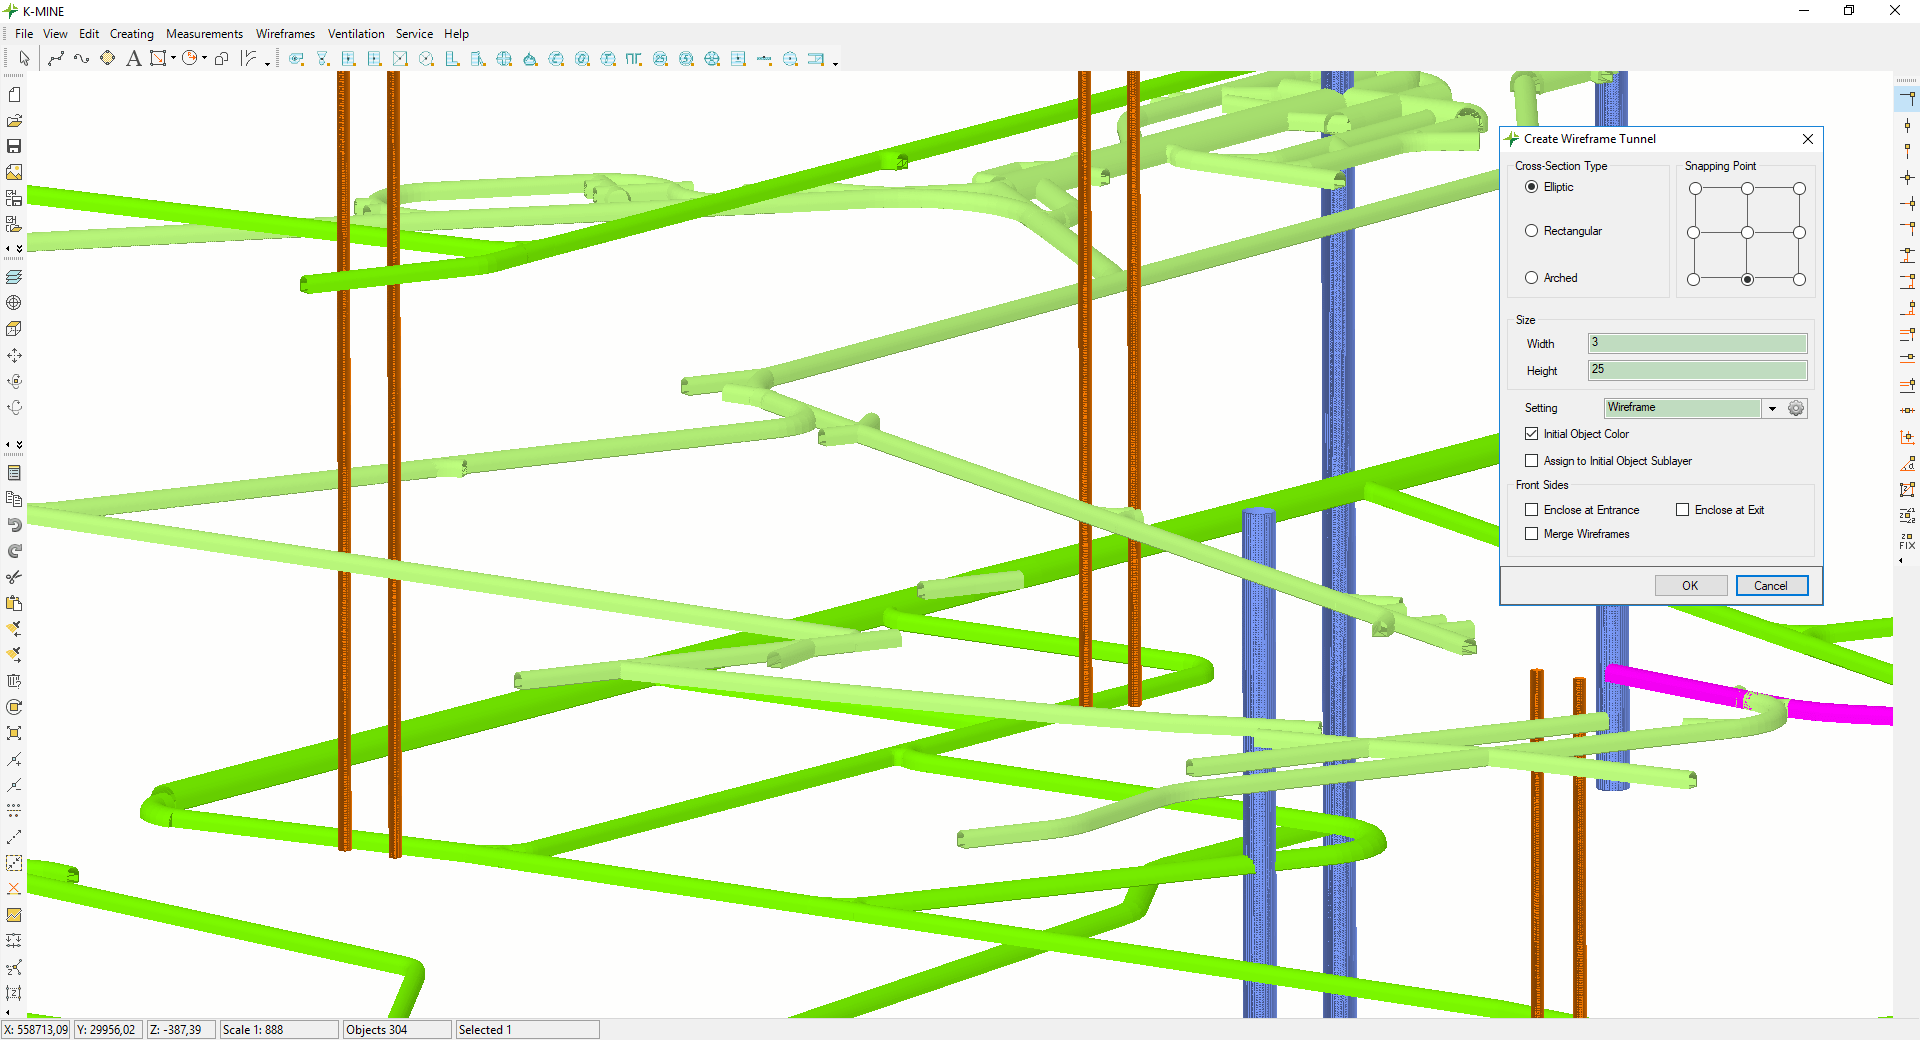 Creating a wireframe 3D-model of underground ventilation system